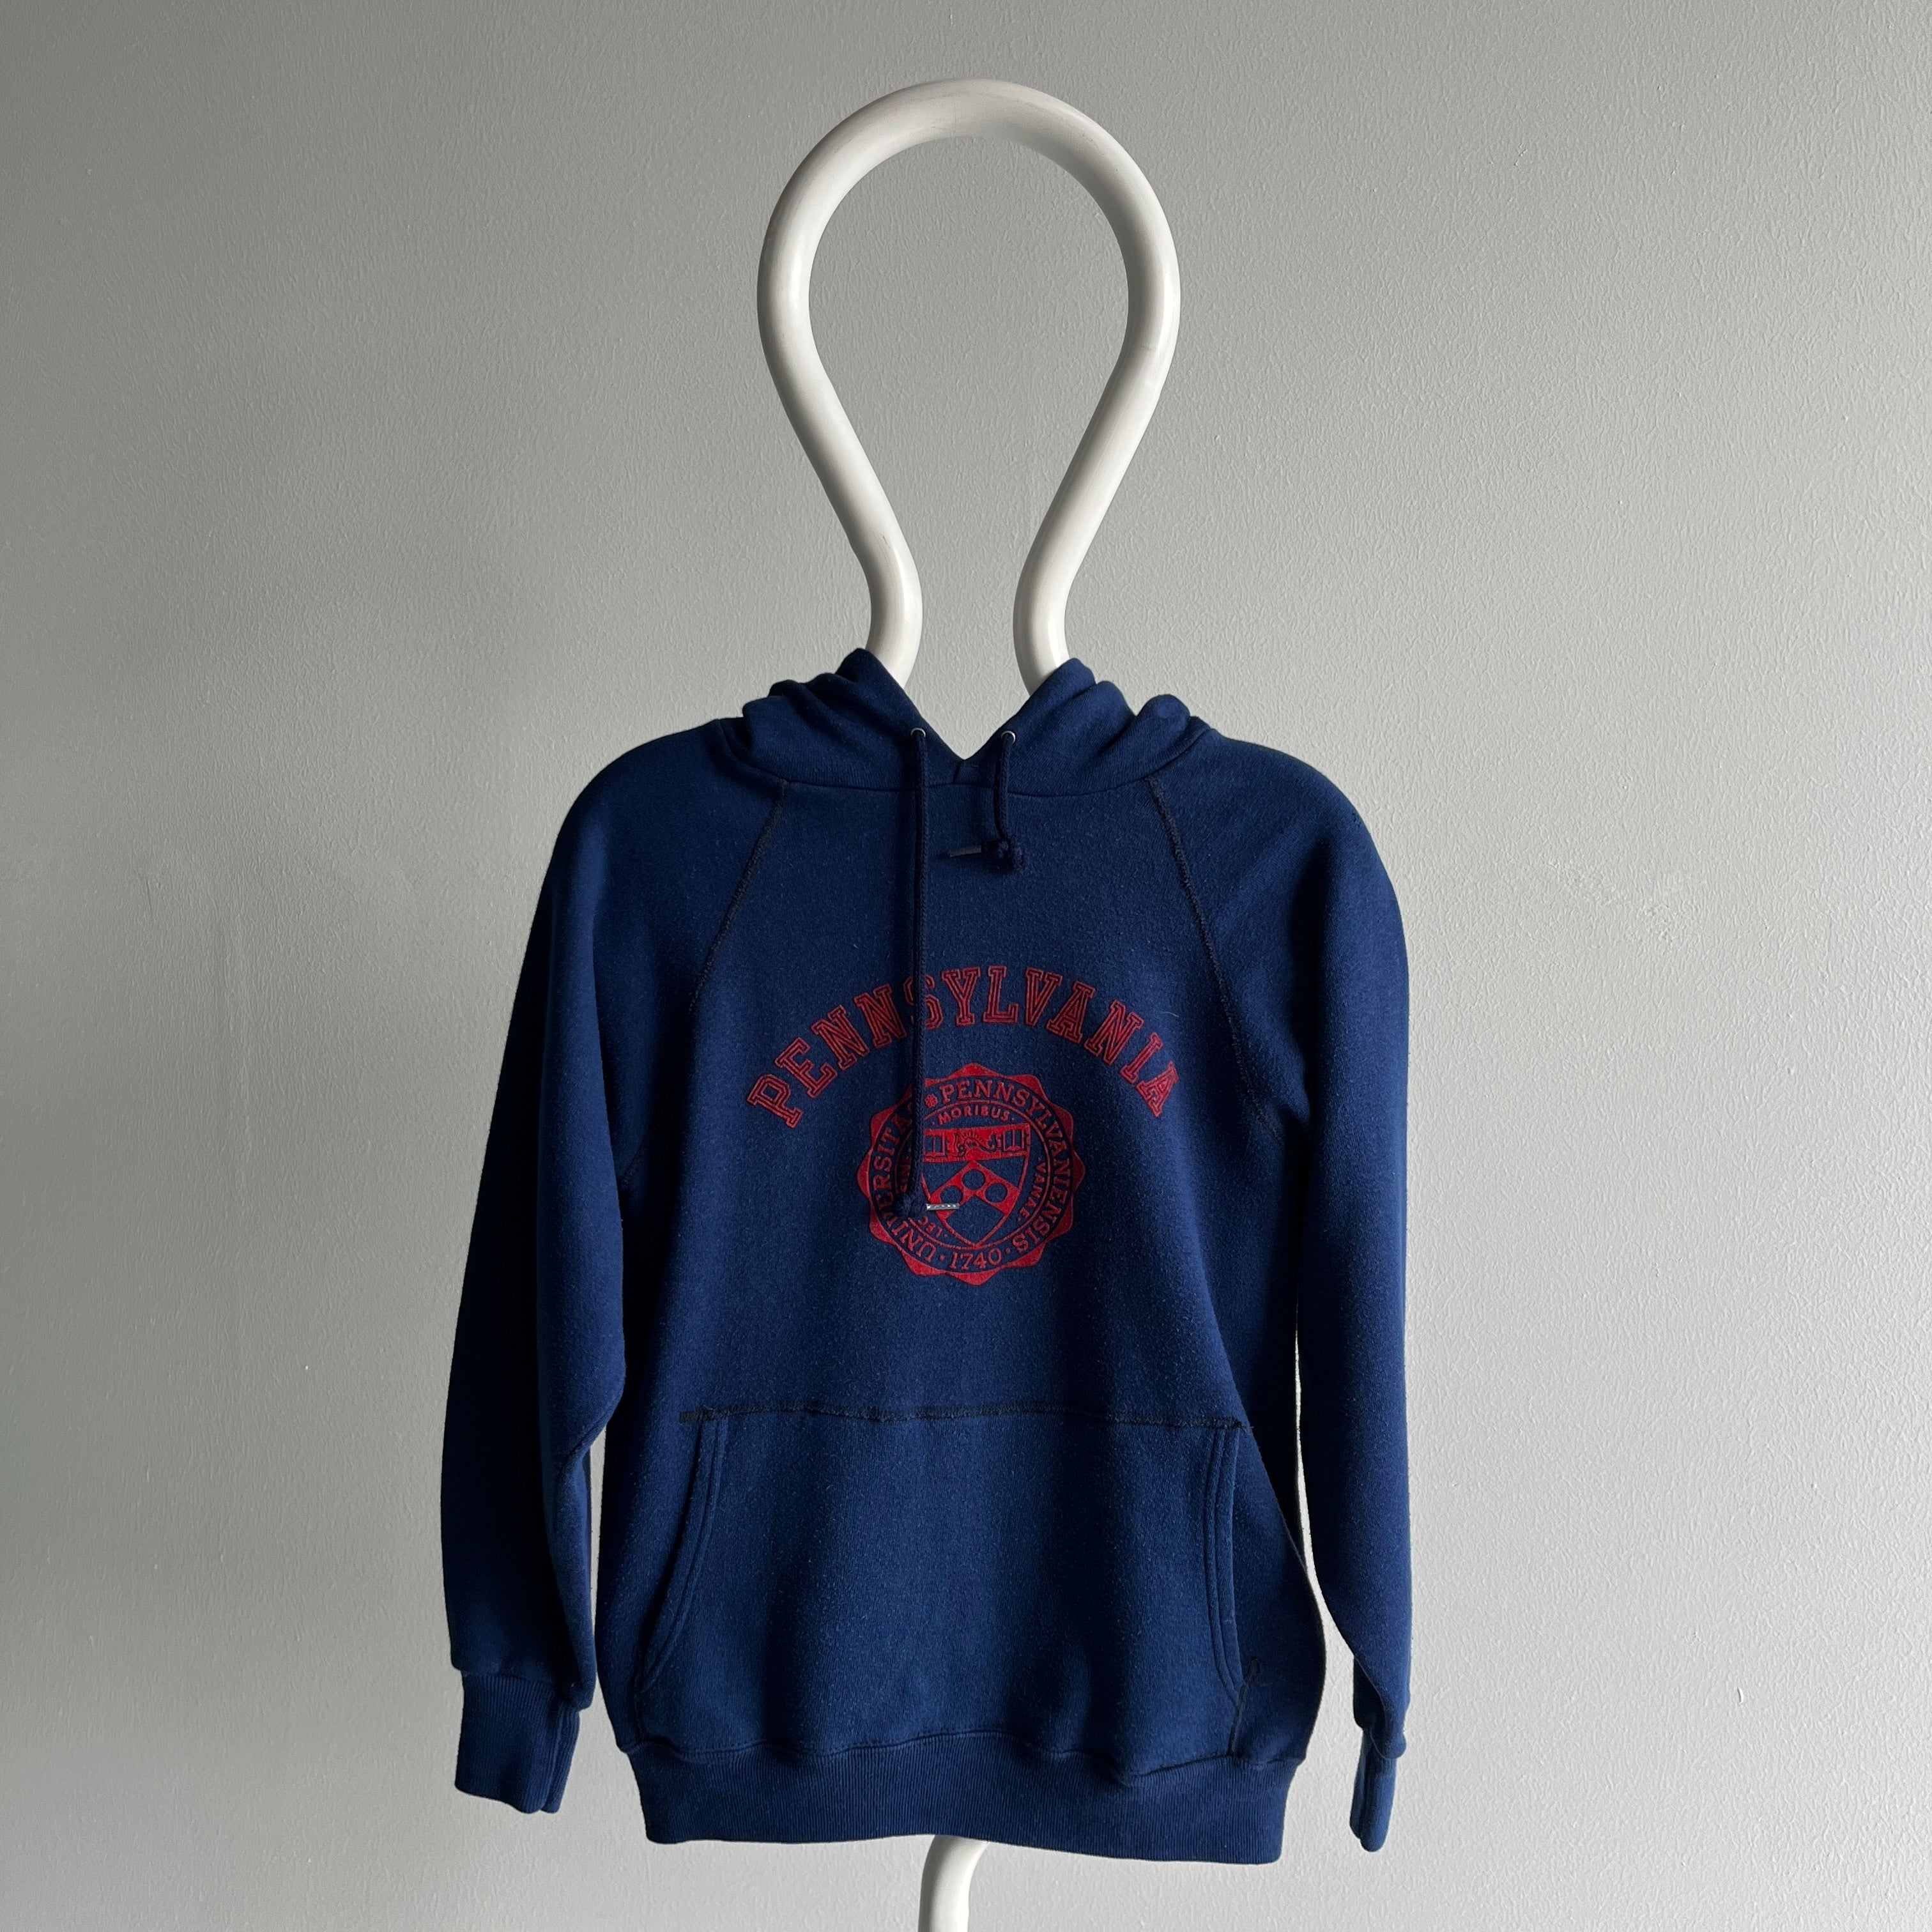 1970/80s University of Pennsylvania Pullover Hoodie by Artex - So Soft